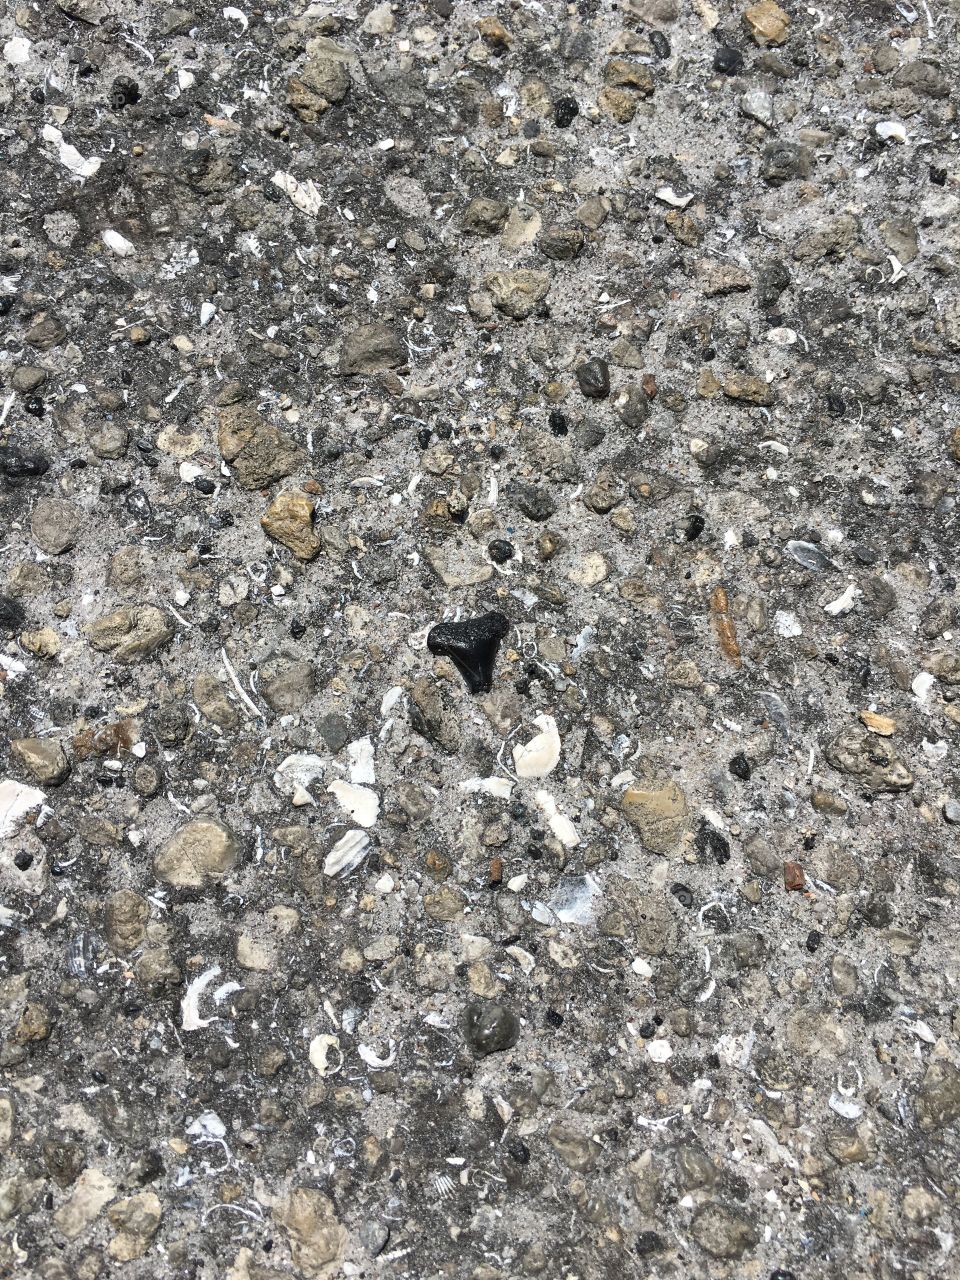 When you find a sharks tooth in the pavement!!!! Say what! 